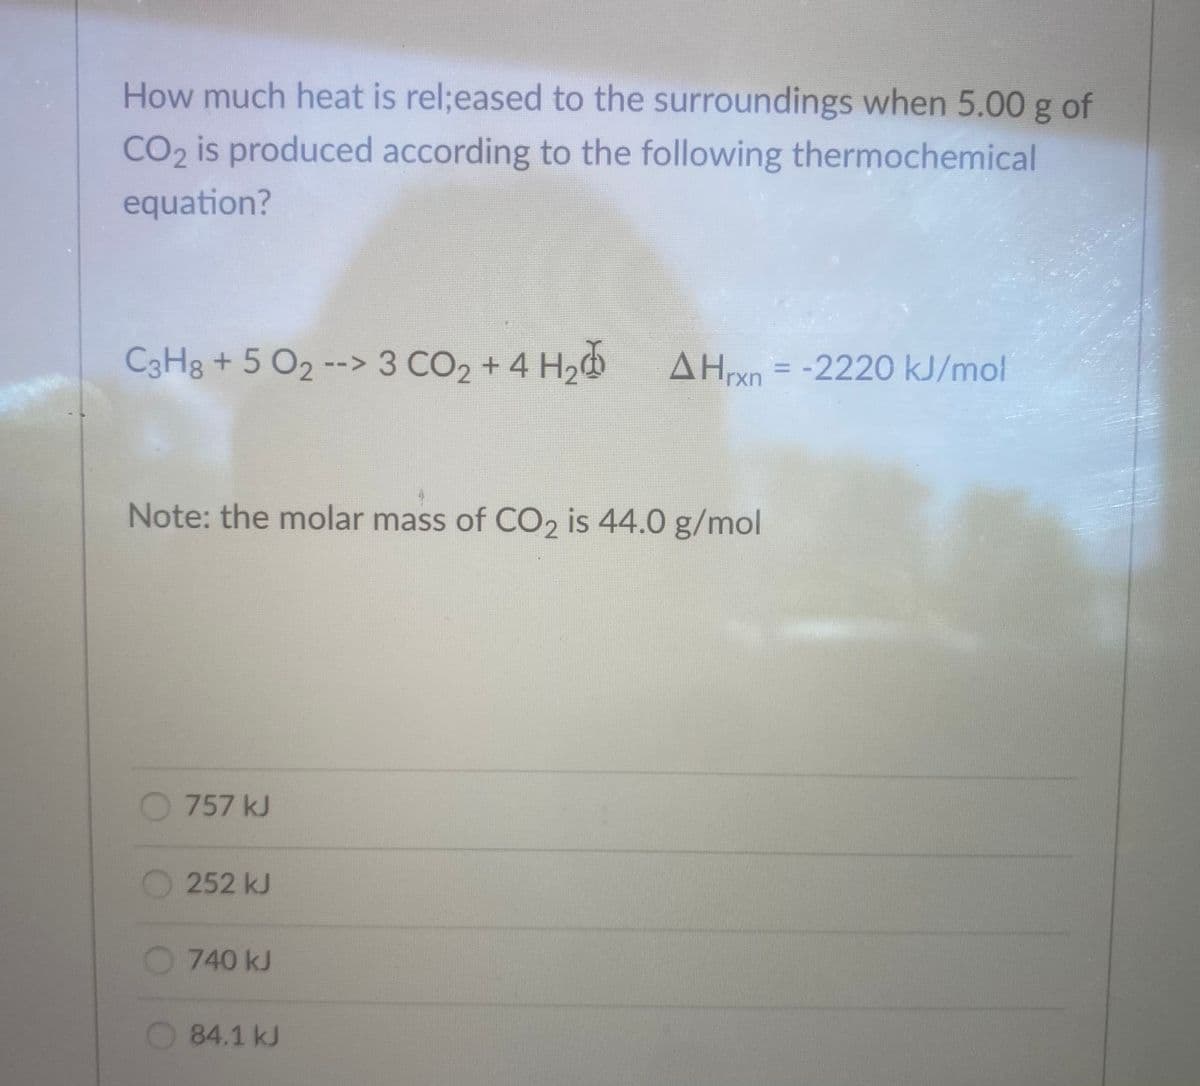 How much heat is rel;eased to the surroundings when 5.00 g of
CO2 is produced according to the following thermochemical
equation?
C3H8 + 5 O2 --> 3 CO2 + 4 H,
AHn = -2220 kJ/mol
%3D
Note: the molar mass of CO2 is 44.0 g/mol
757 kJ
O252 kJ
740 kJ
84.1 kJ
